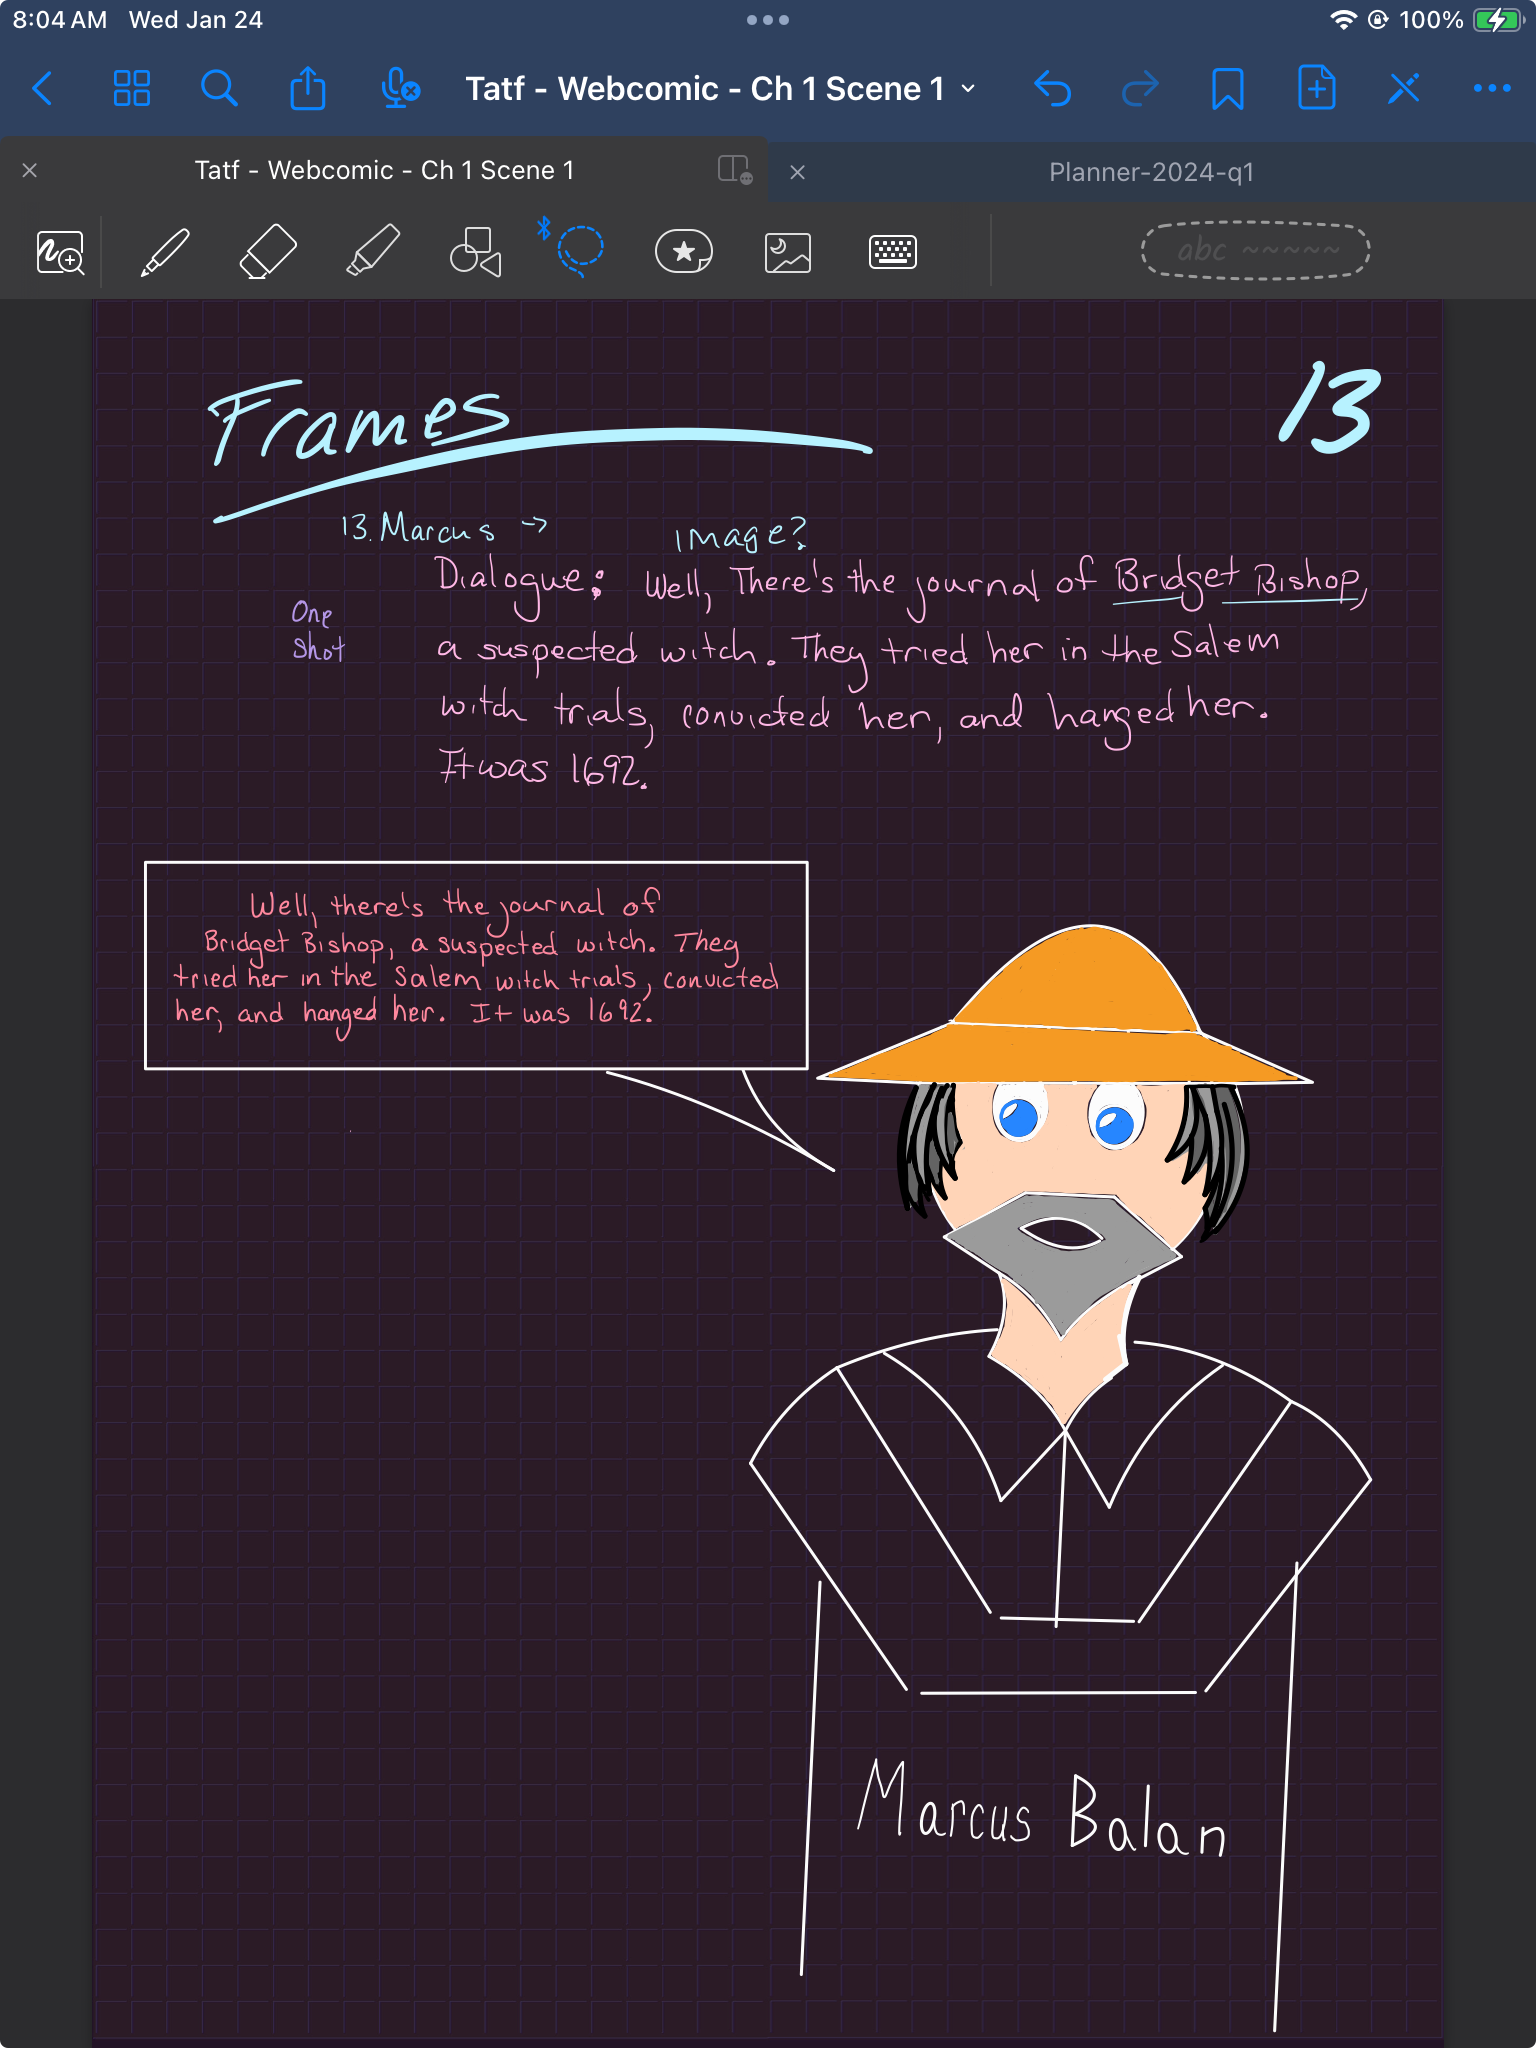 Todd and the Fae WebComic : Frame 13